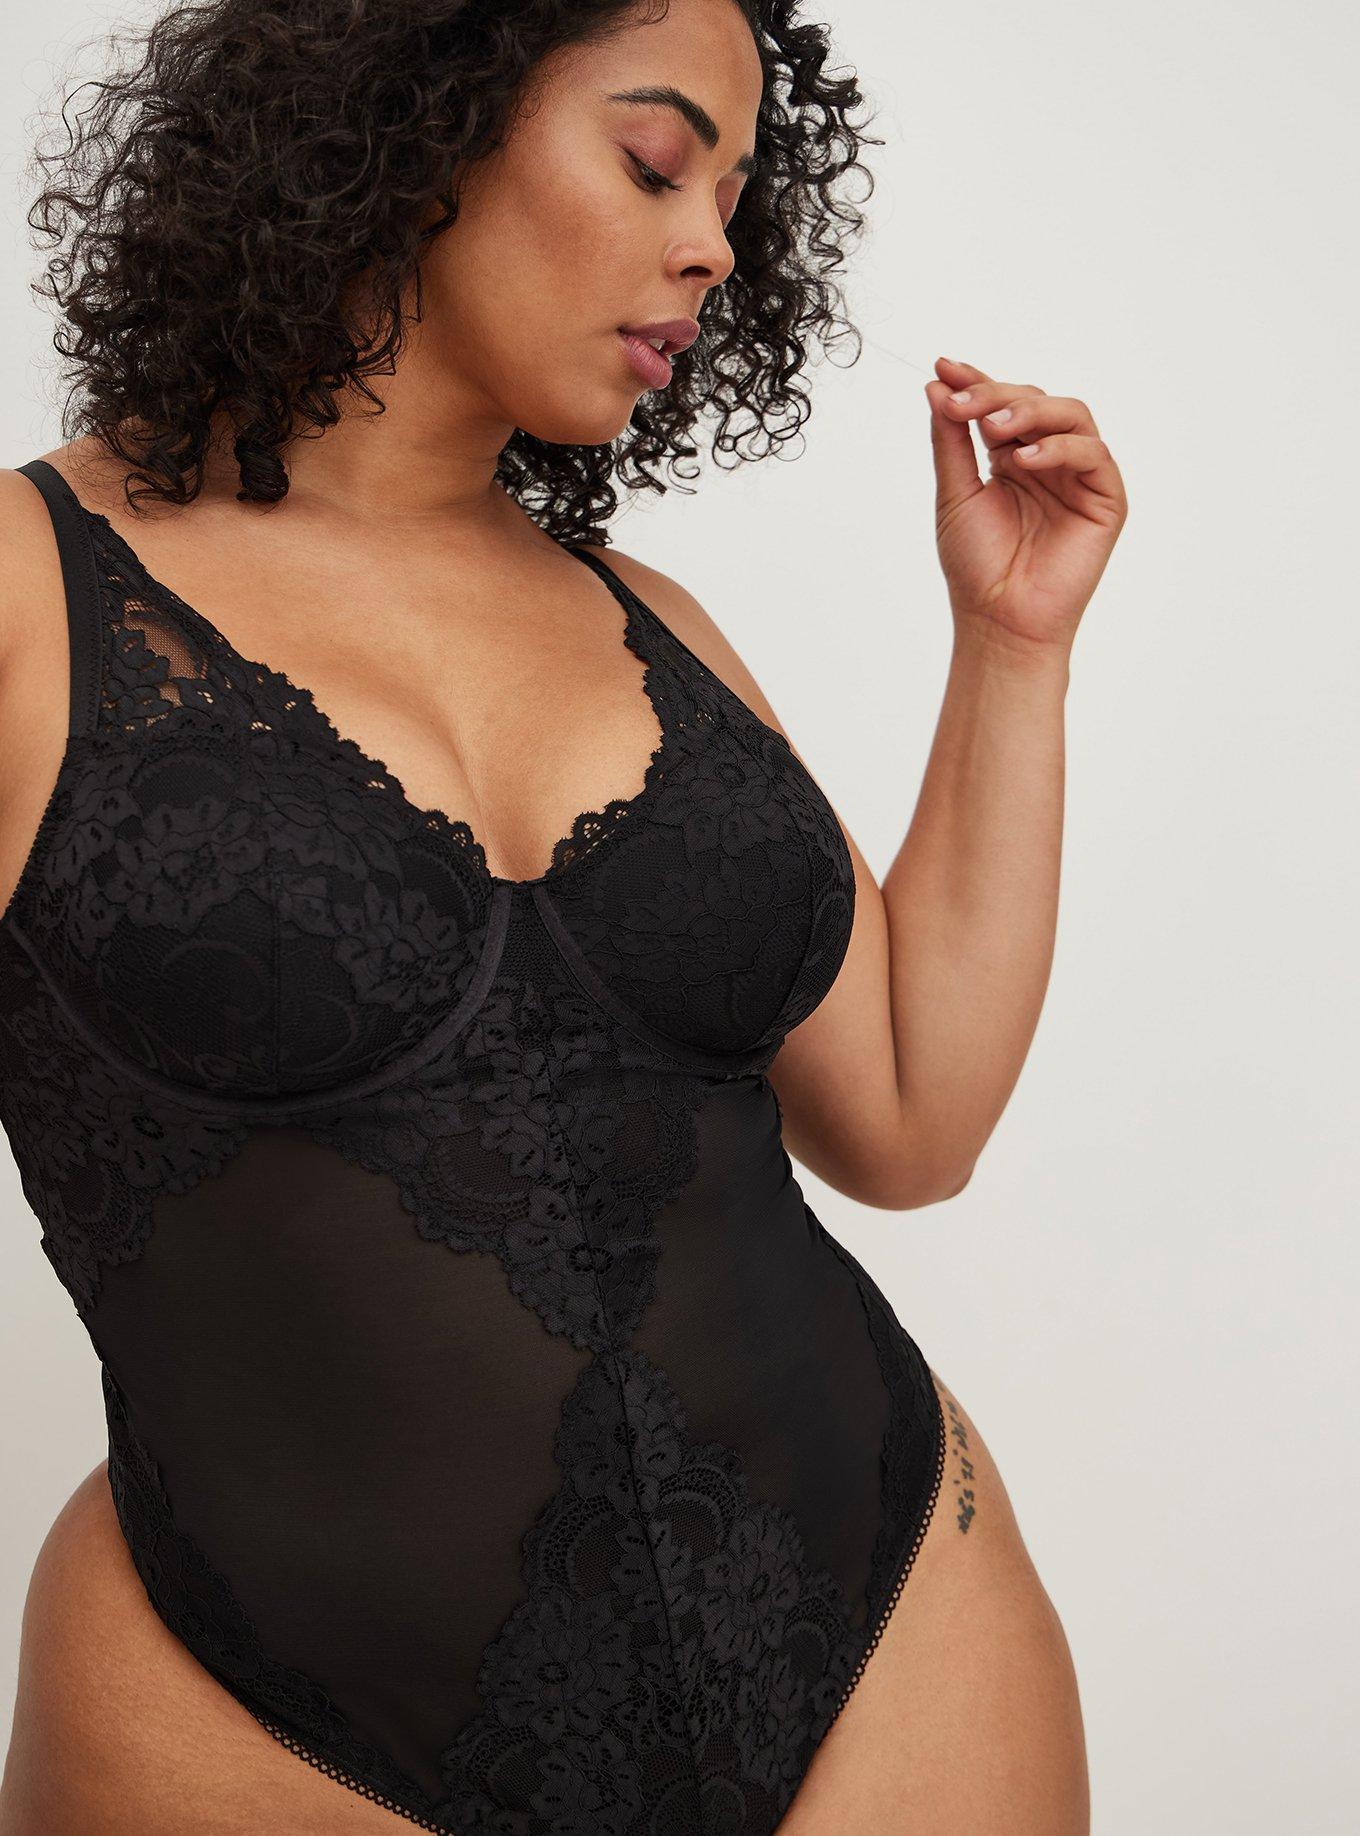 Torrid red lace cage underwire bodysuit